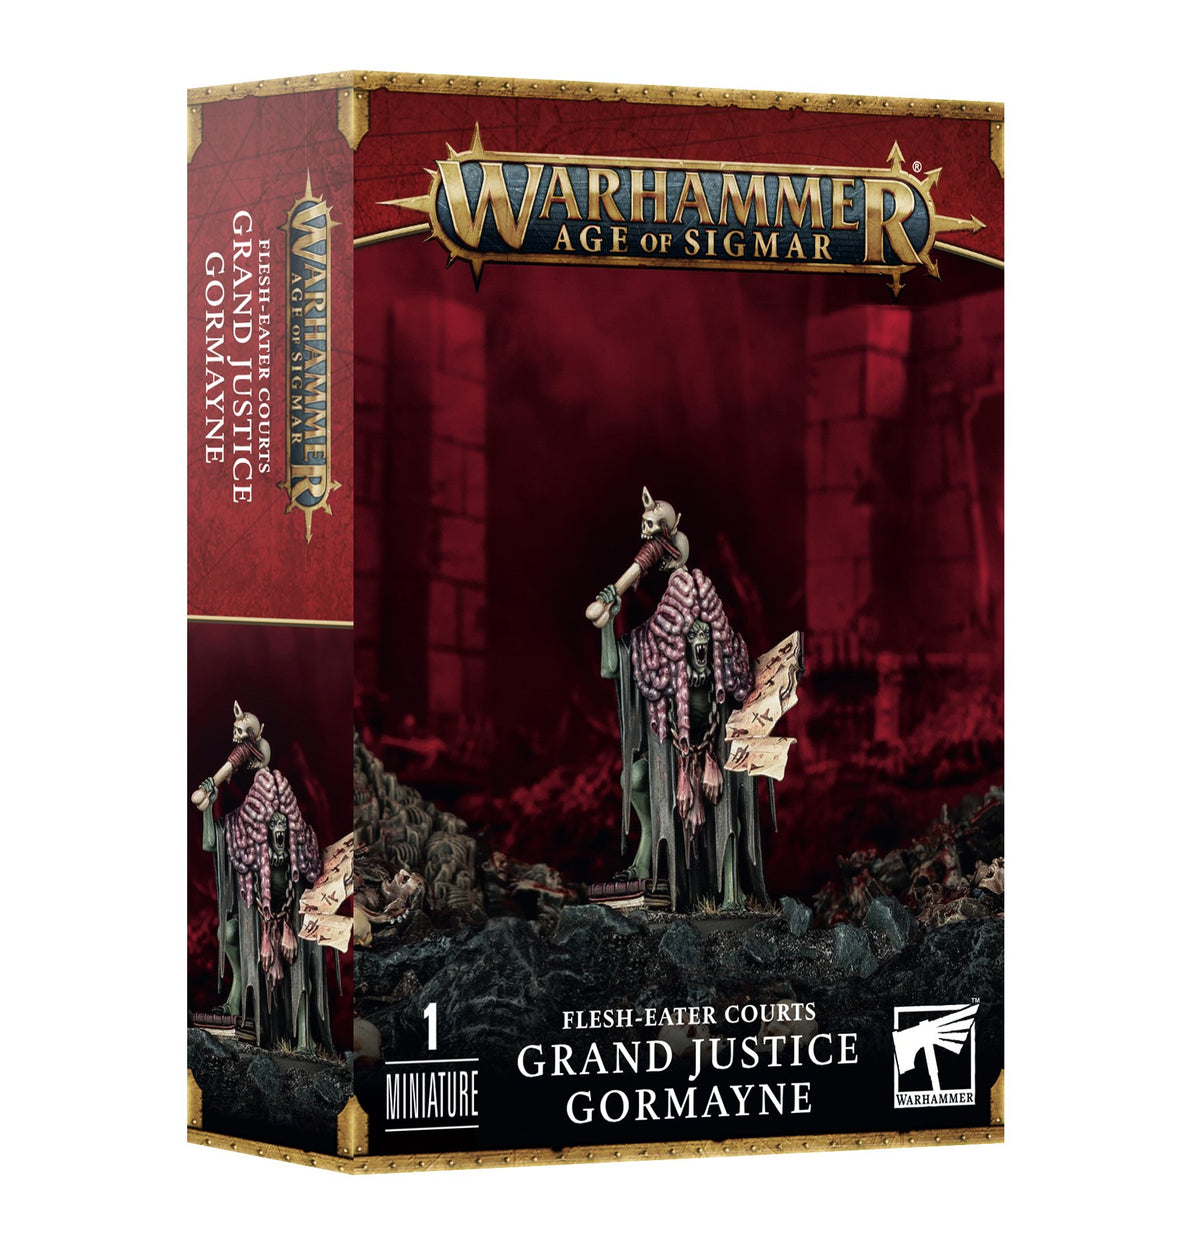 Warhammer Age Of Sigmar: F-E COURTS: GRAND JUSTICE GORMAYNE